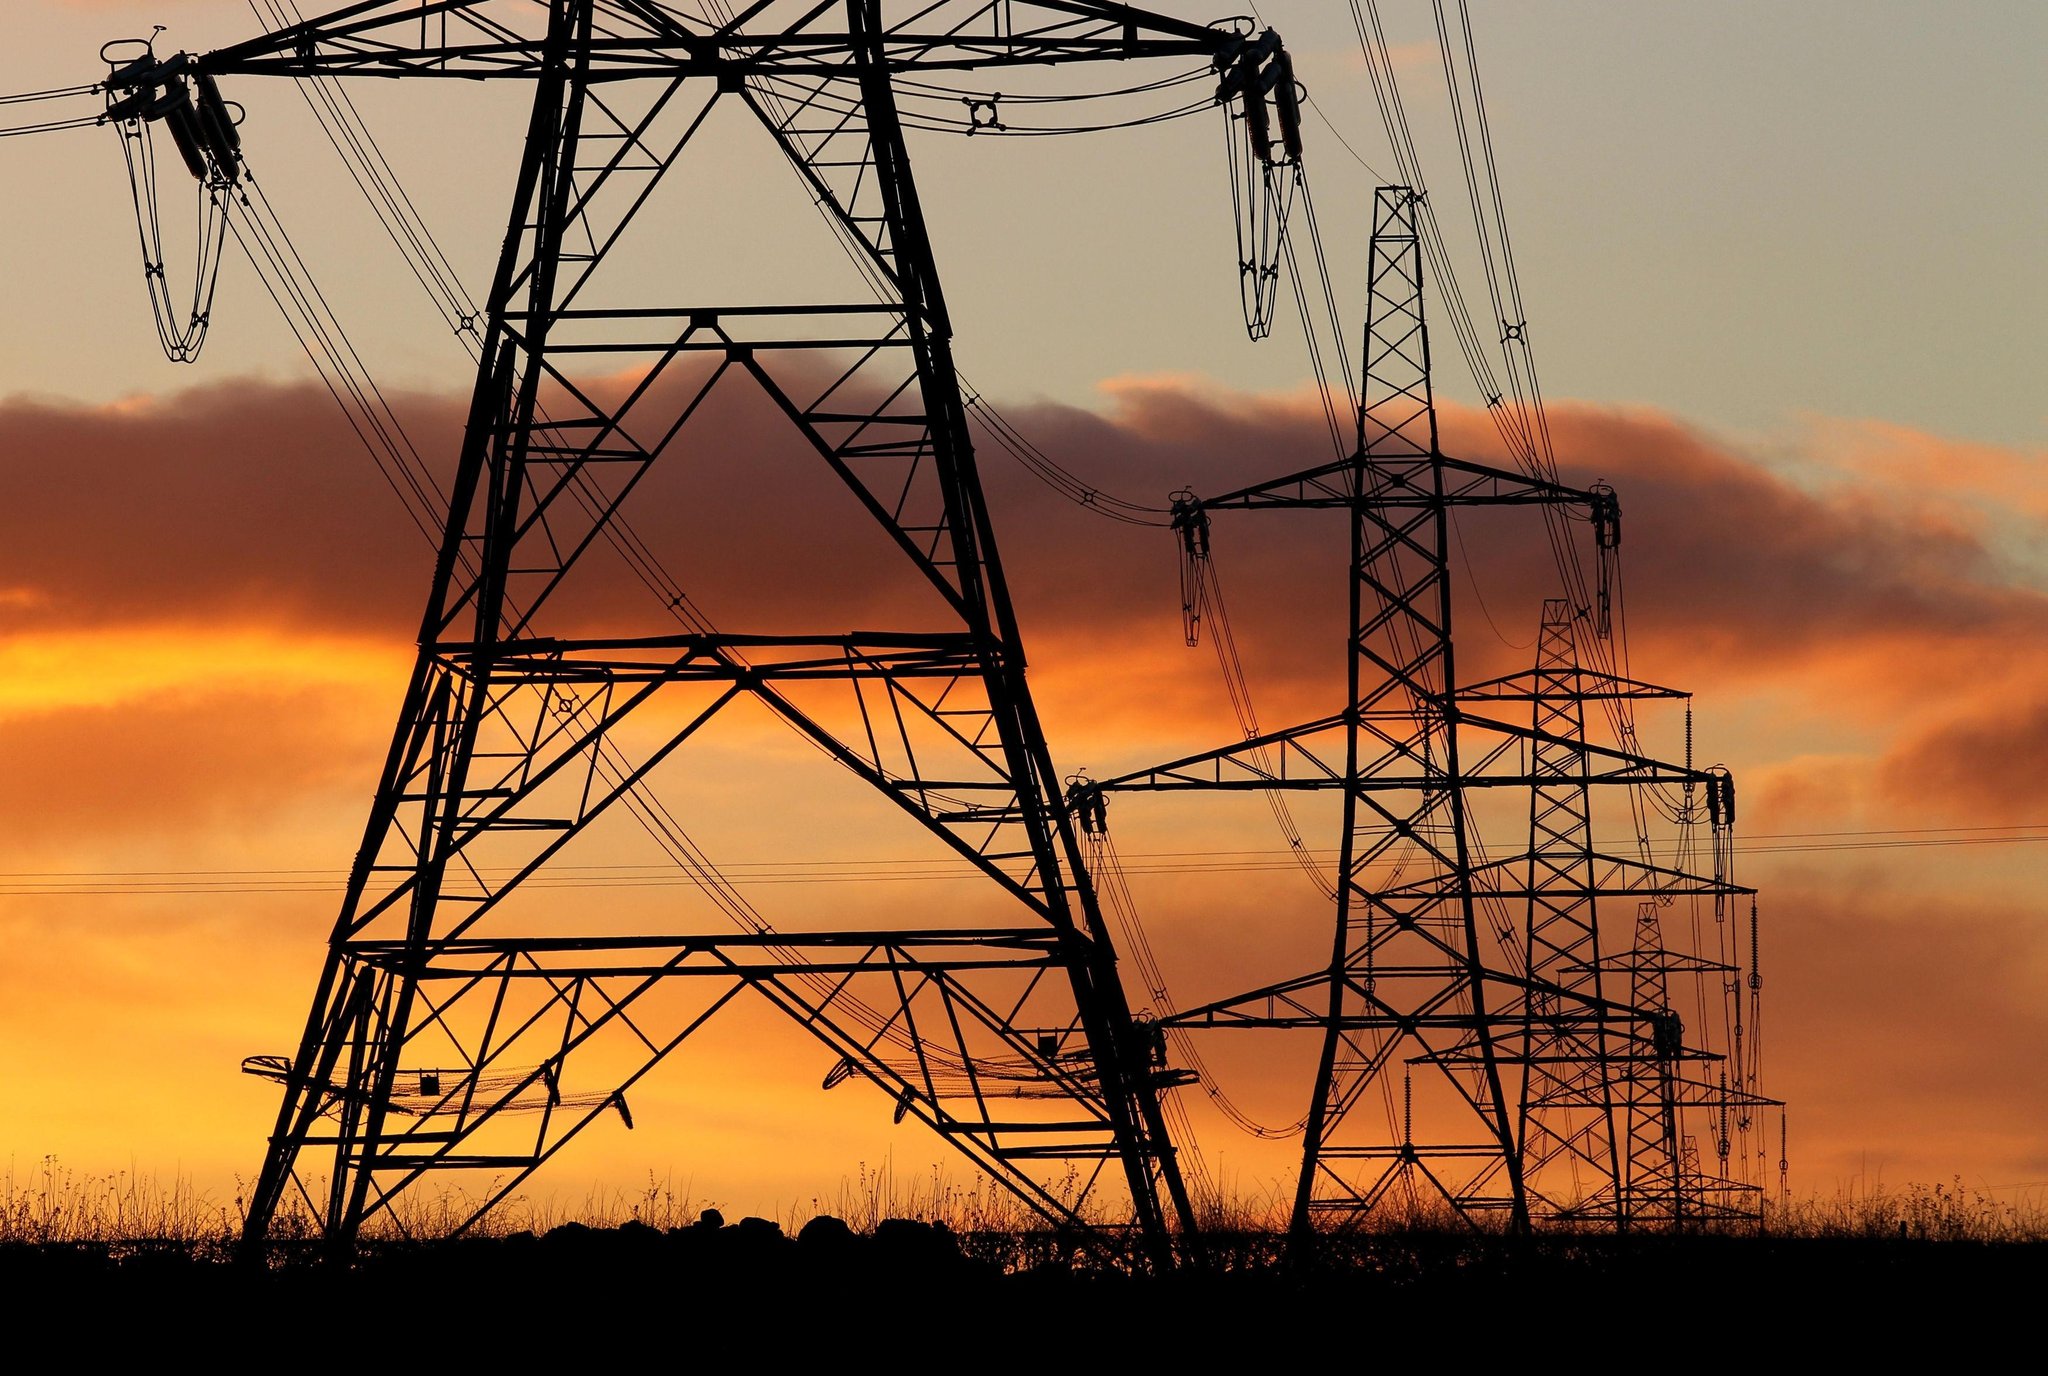 Major blow for households as Power NI hikes electricity prices by 27.5 per cent